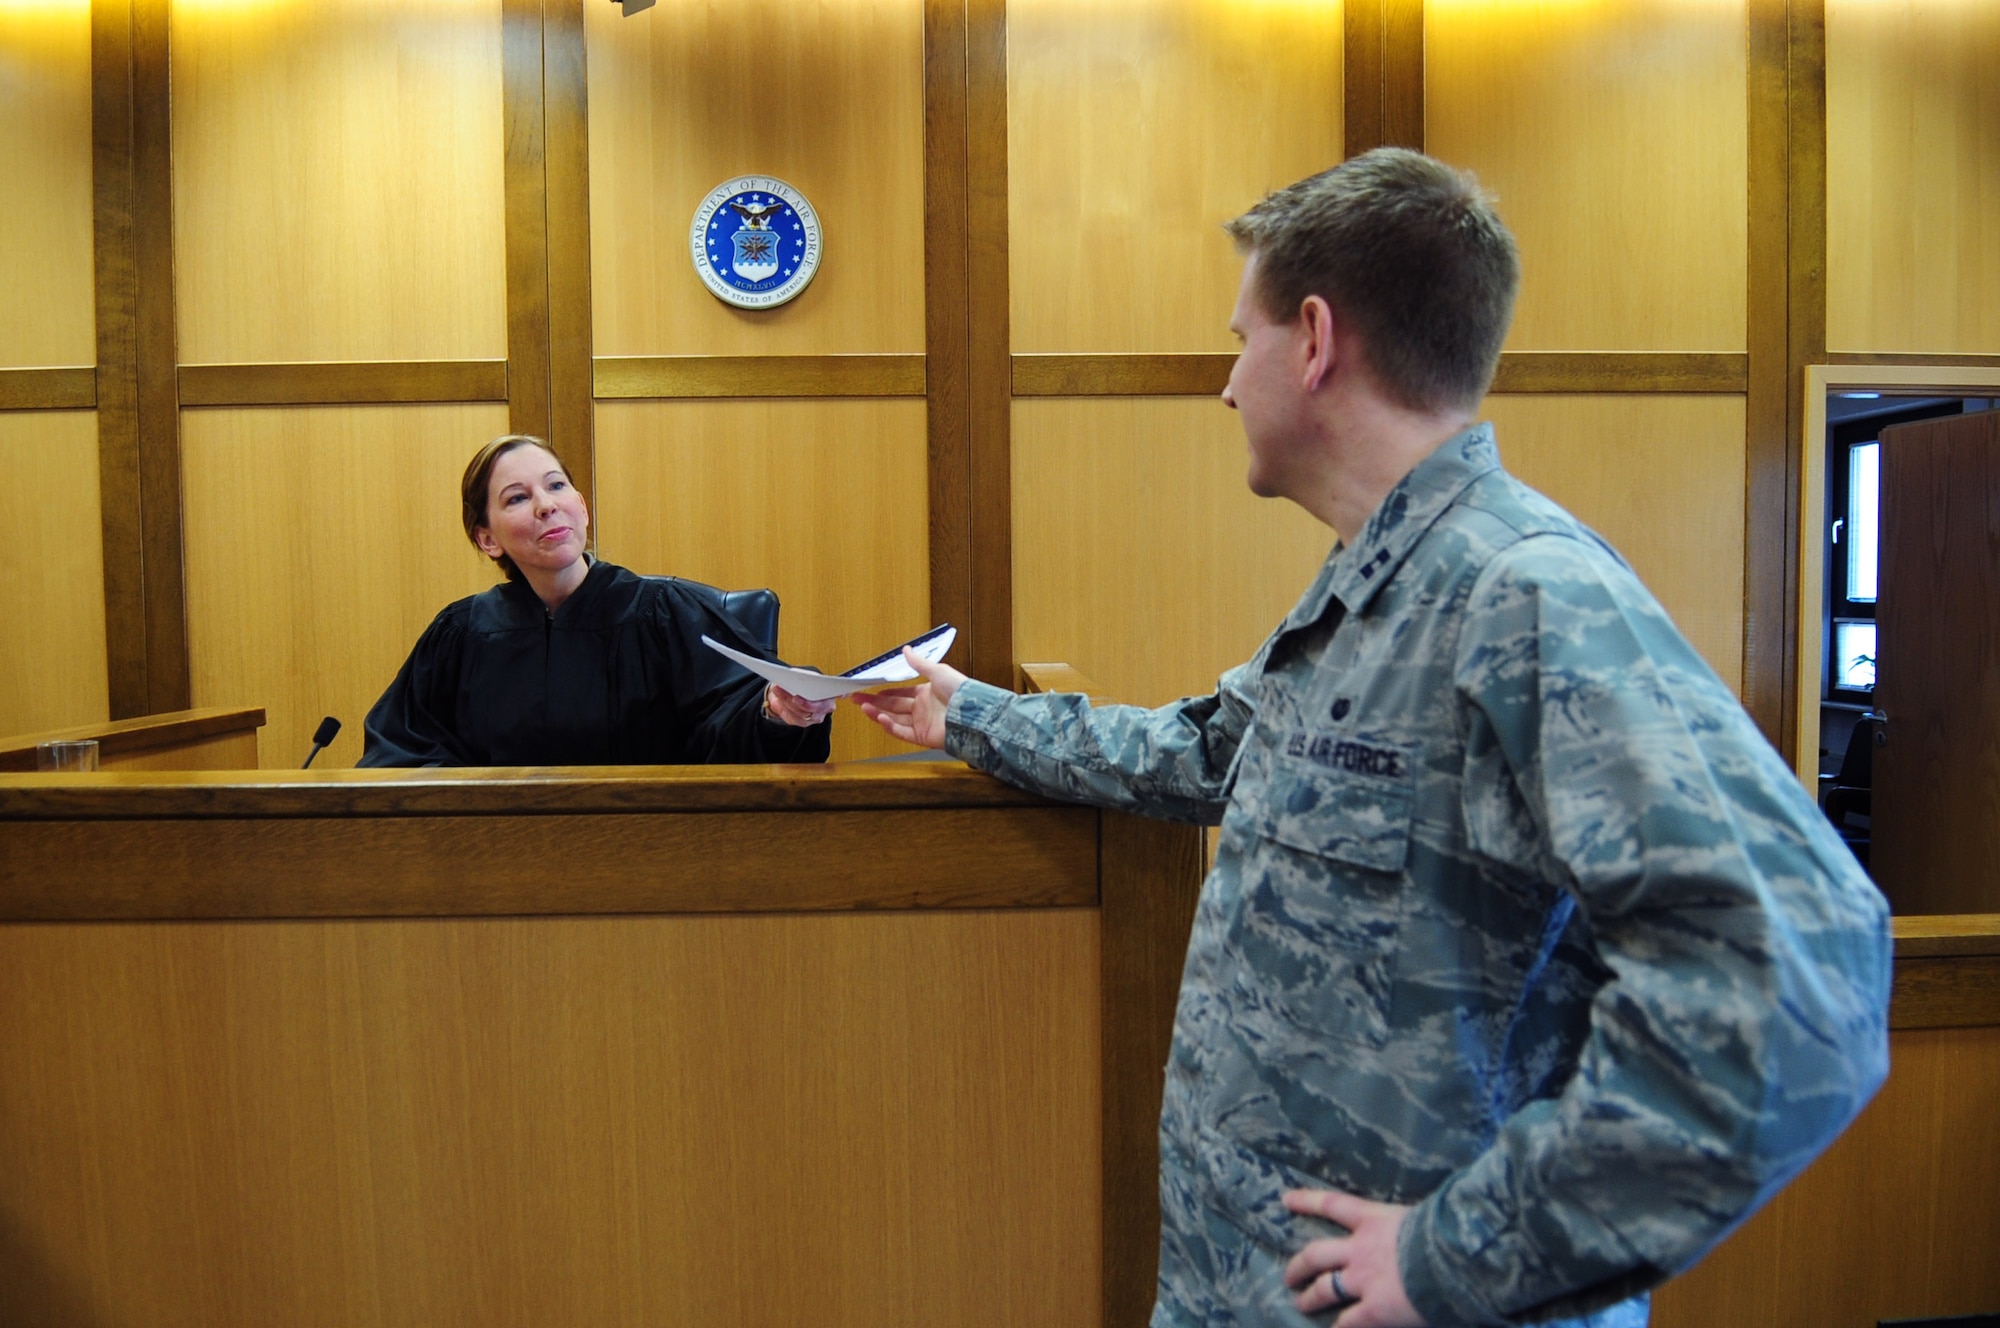 Lt. Col. Olga Sinquefield, 86th Airlift Wing Judge Advocate, receives paperwork from Capt. Dan Colton, 86th AW, Law Center, Ramstein Air Base, Germany, March 20, 2012. Members at the Law Center strive to provide on-time, on-target legal advice and services to the Kaiserslautern Military Community. (U.S. Air Force photo by Senior Airman Brittany Perry)